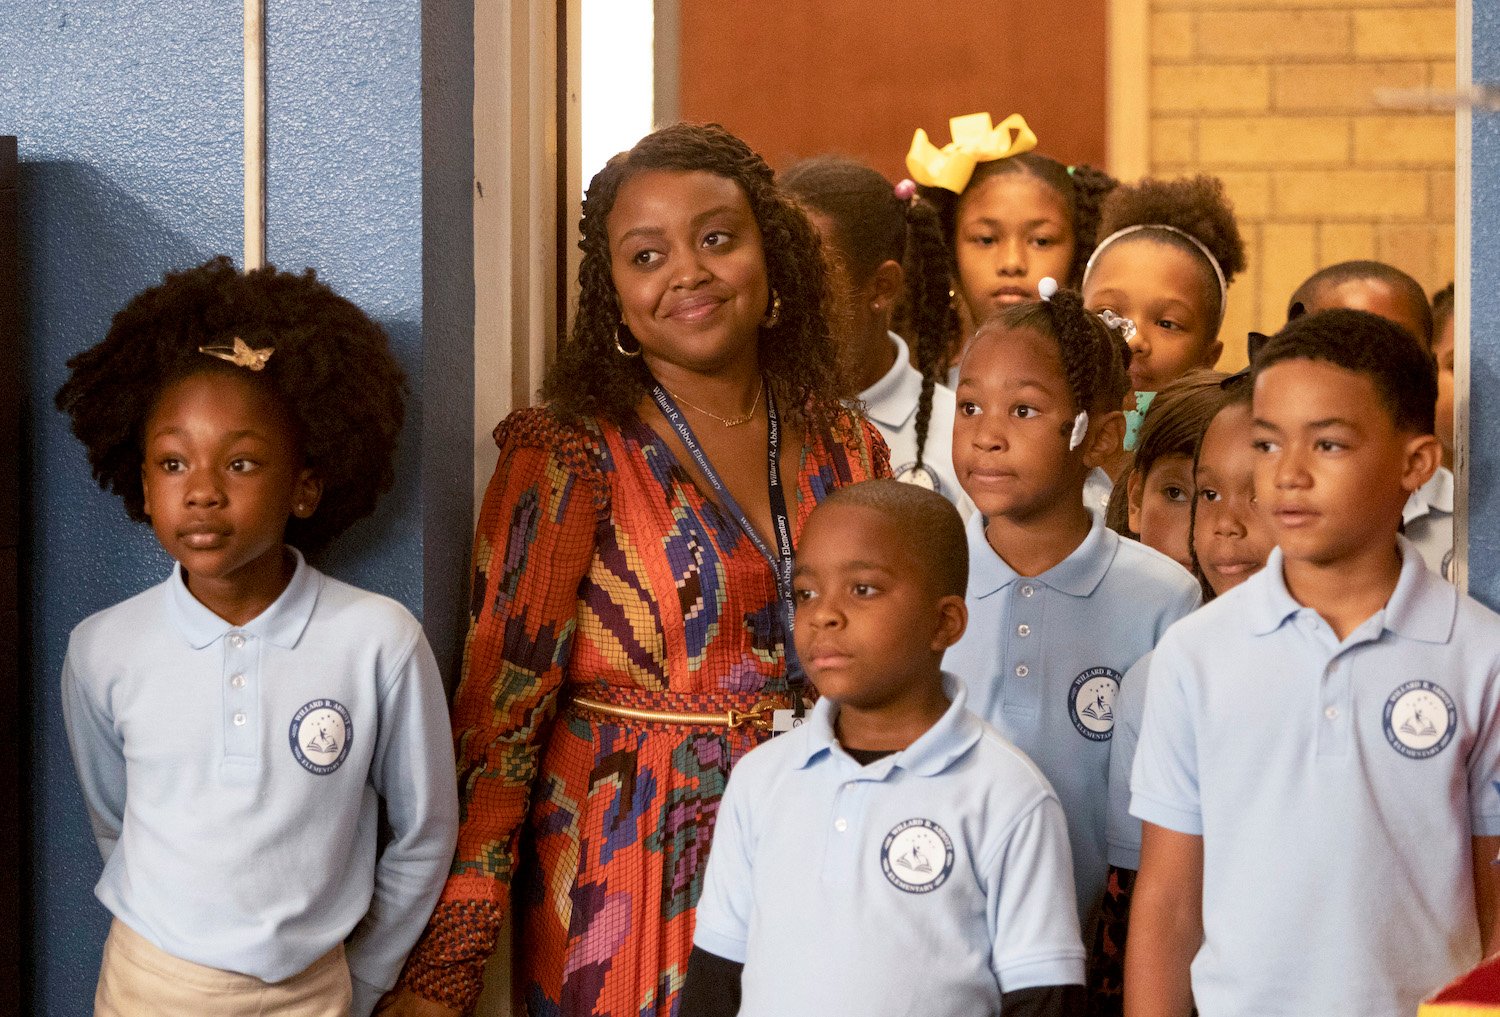 ‘Abbott Elementary’ Season 2: Release Date, Plot Details, and Everything We Know